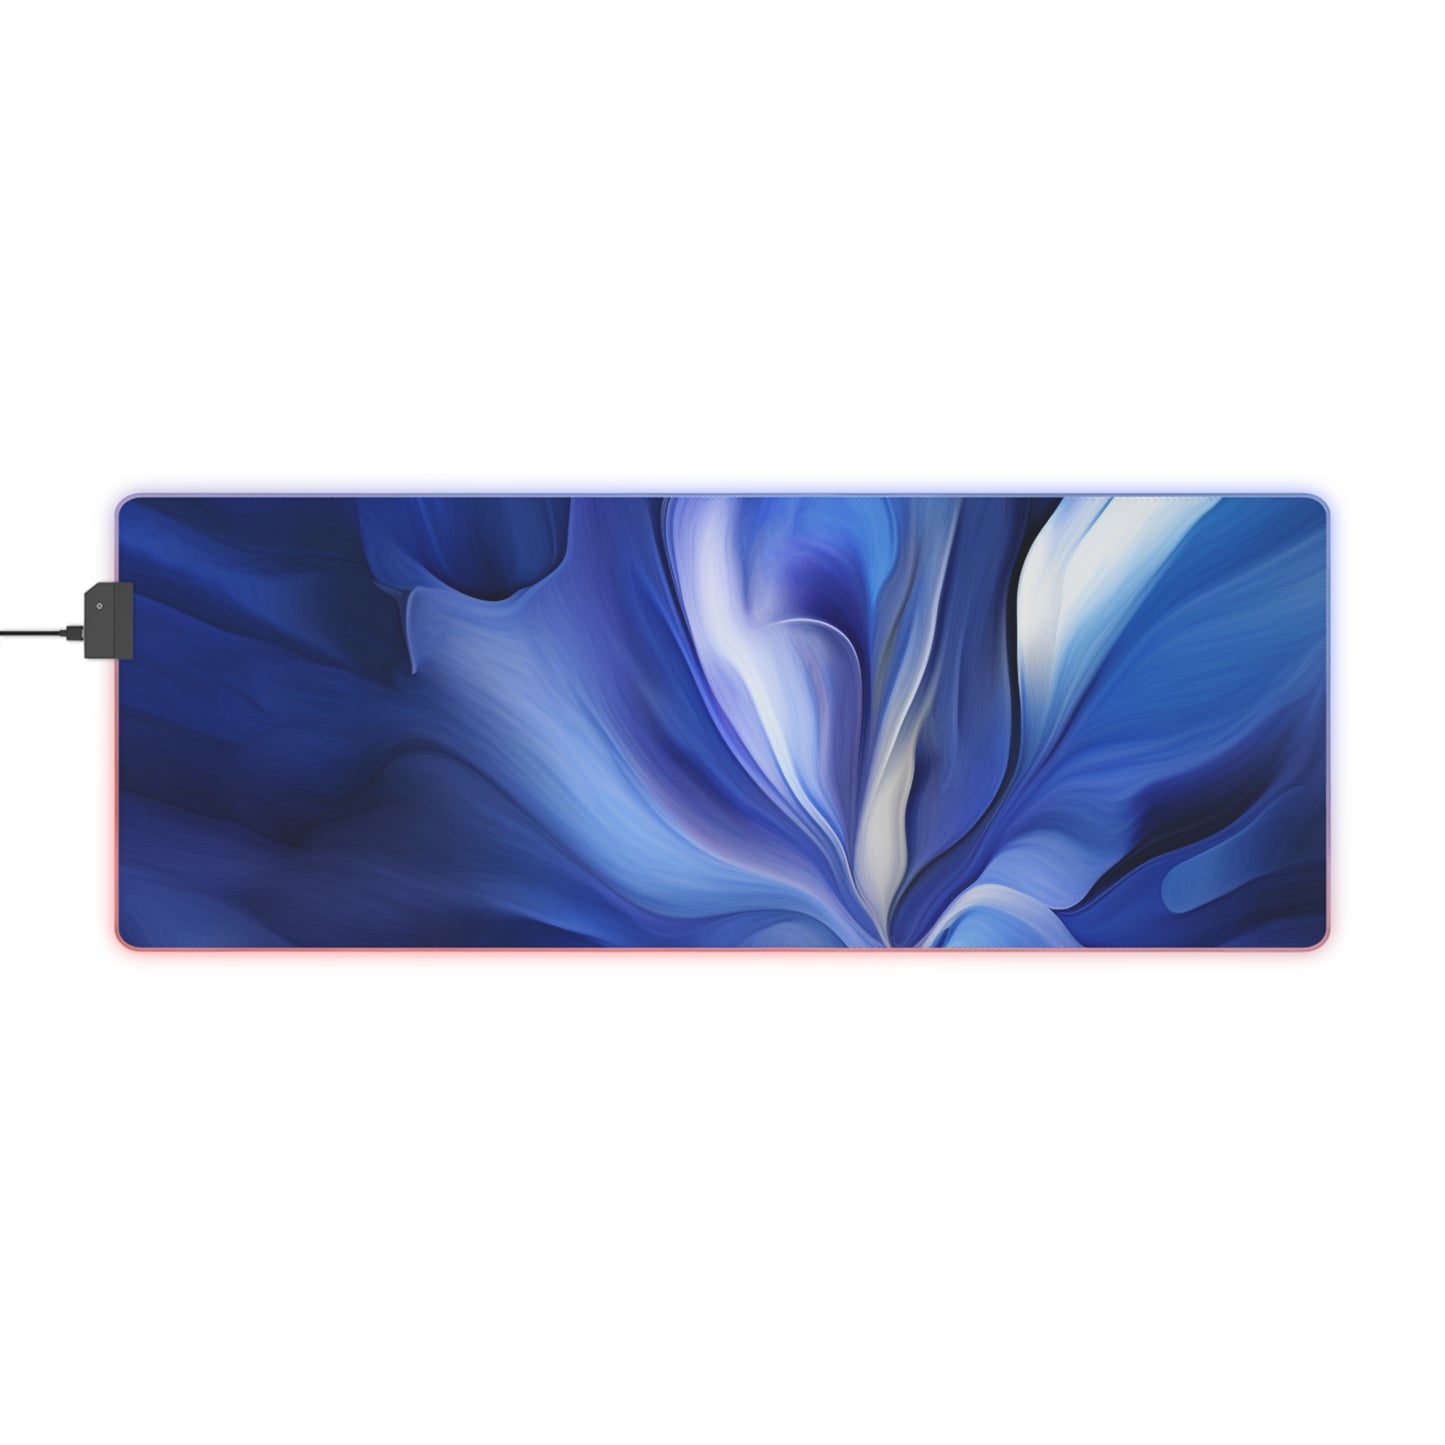 LED Gaming Mouse Pad Abstract Blue Tulip 3